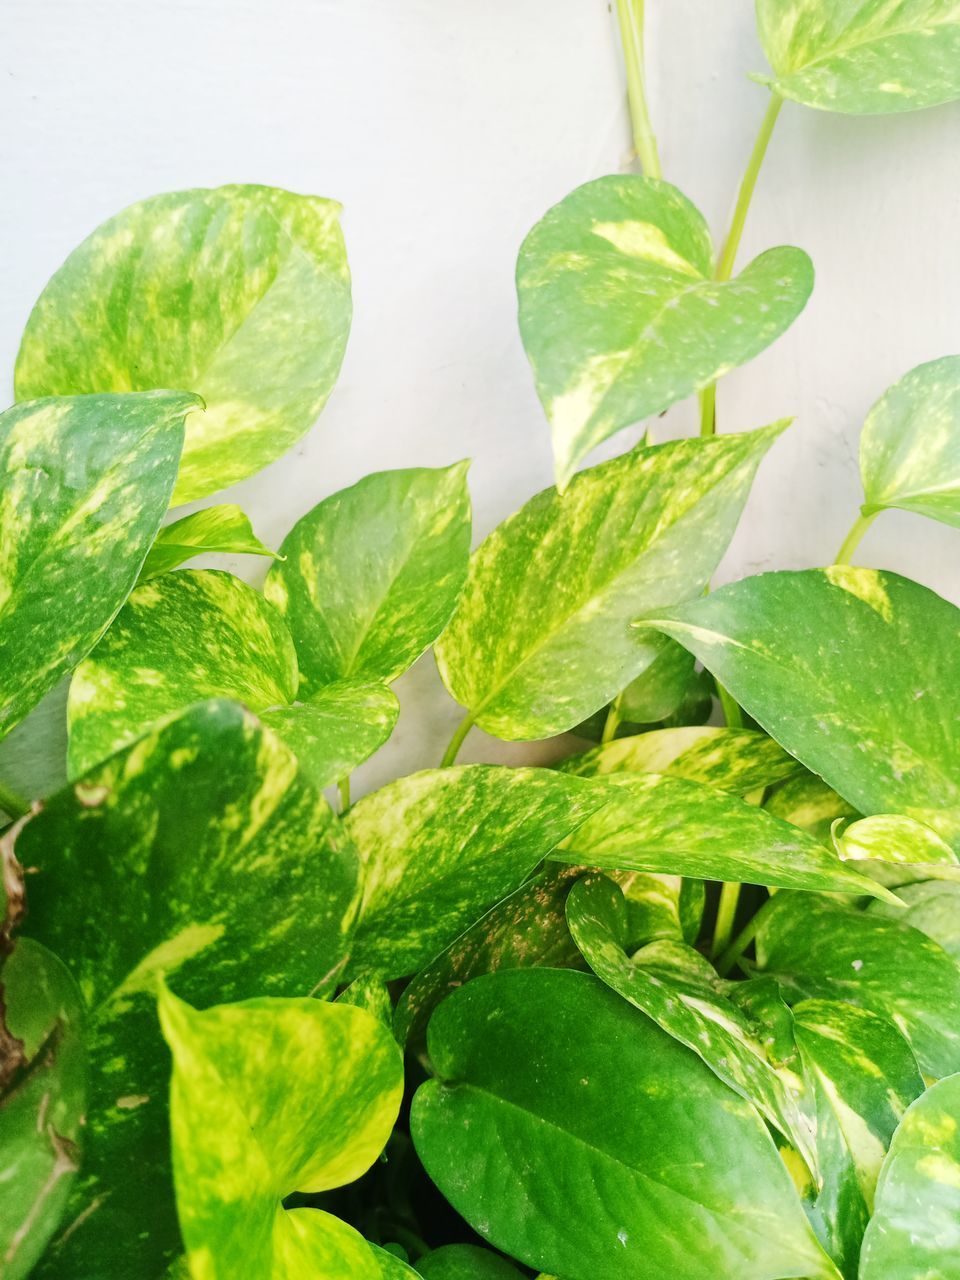 CLOSE-UP OF FRESH GREEN LEAVES WITH PLANT